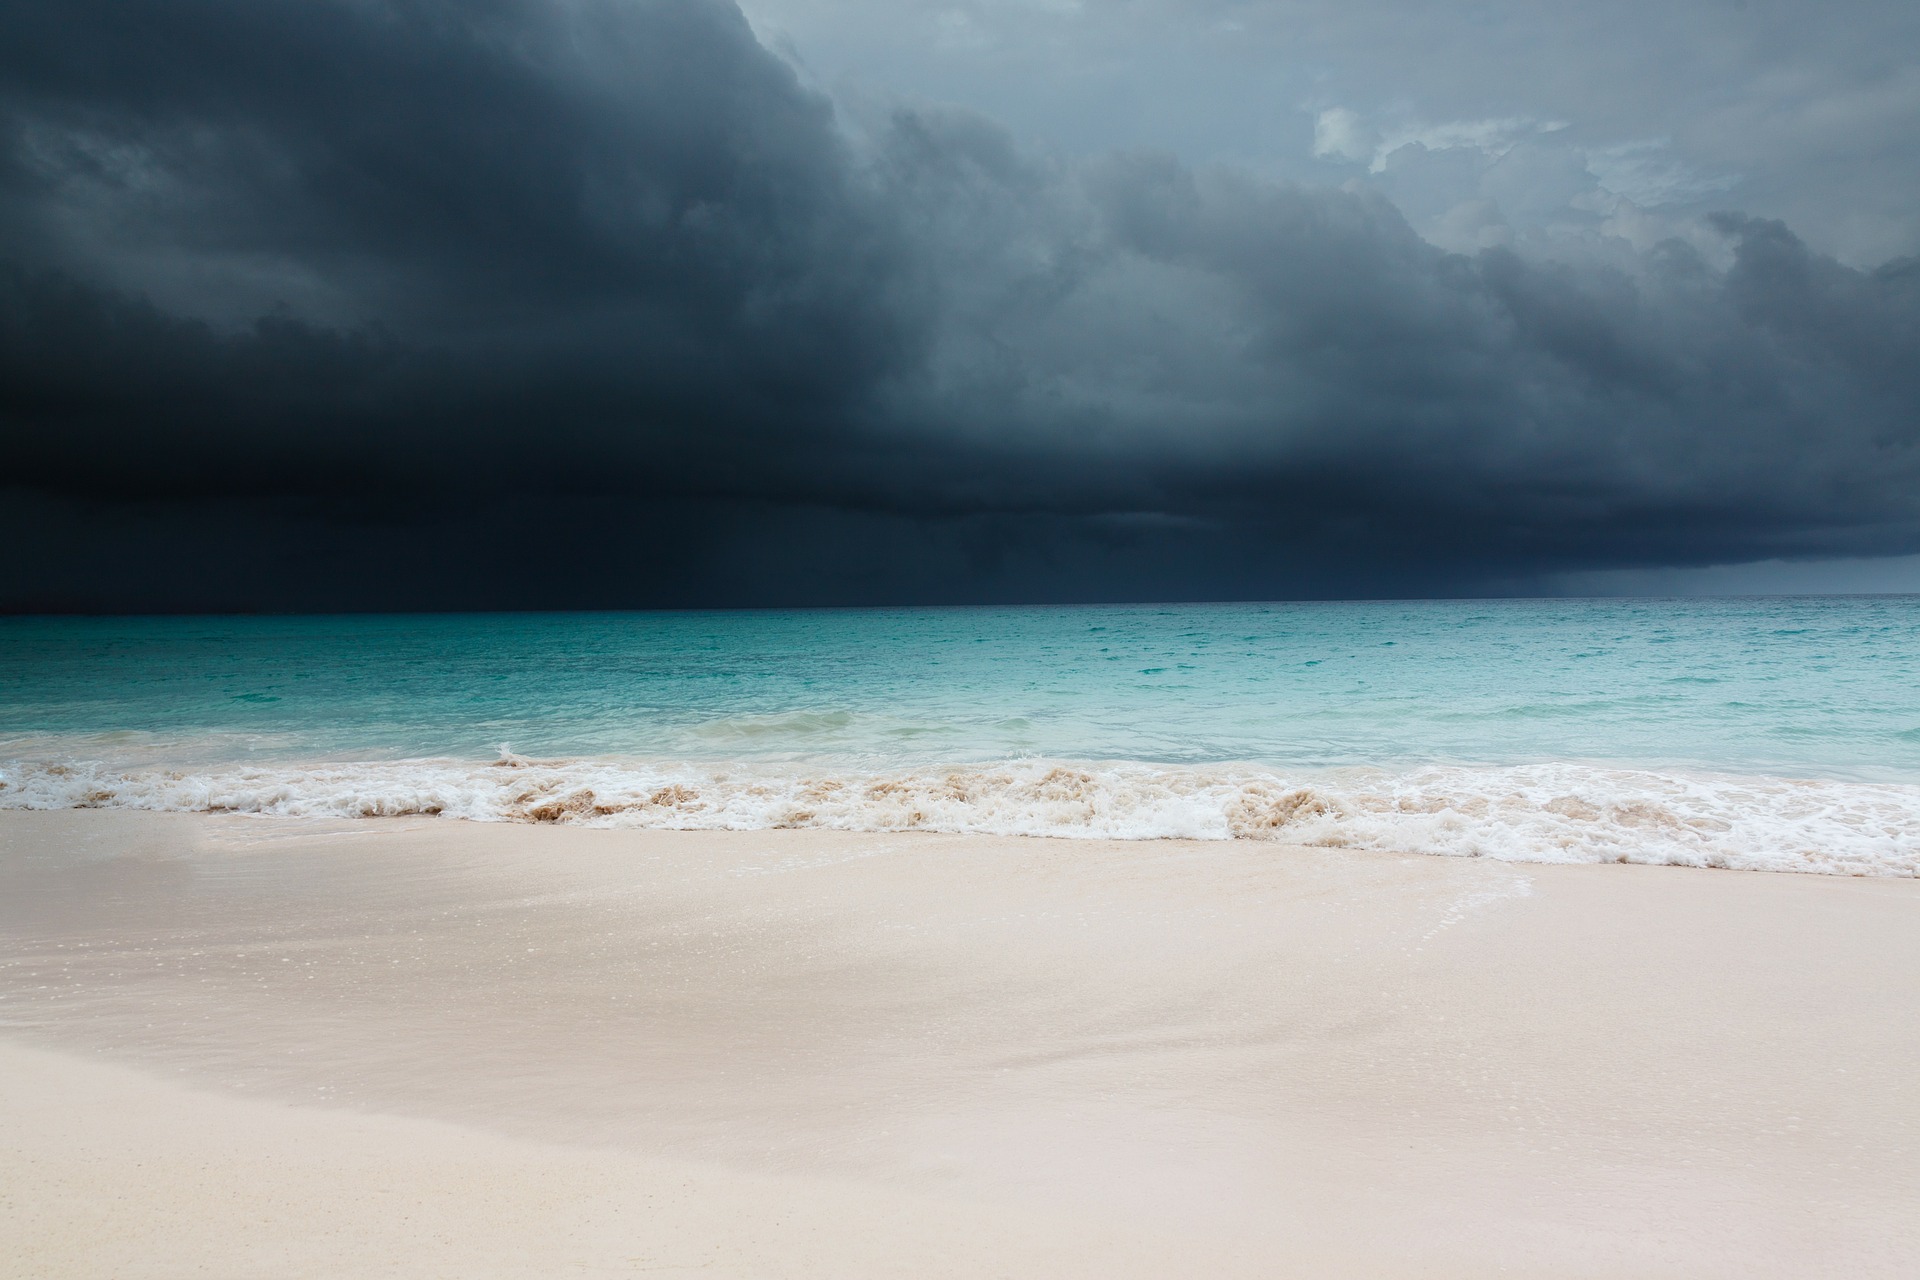 How the hurricane in The Bahamas is shedding light on Caribbean xenophobia and climate change